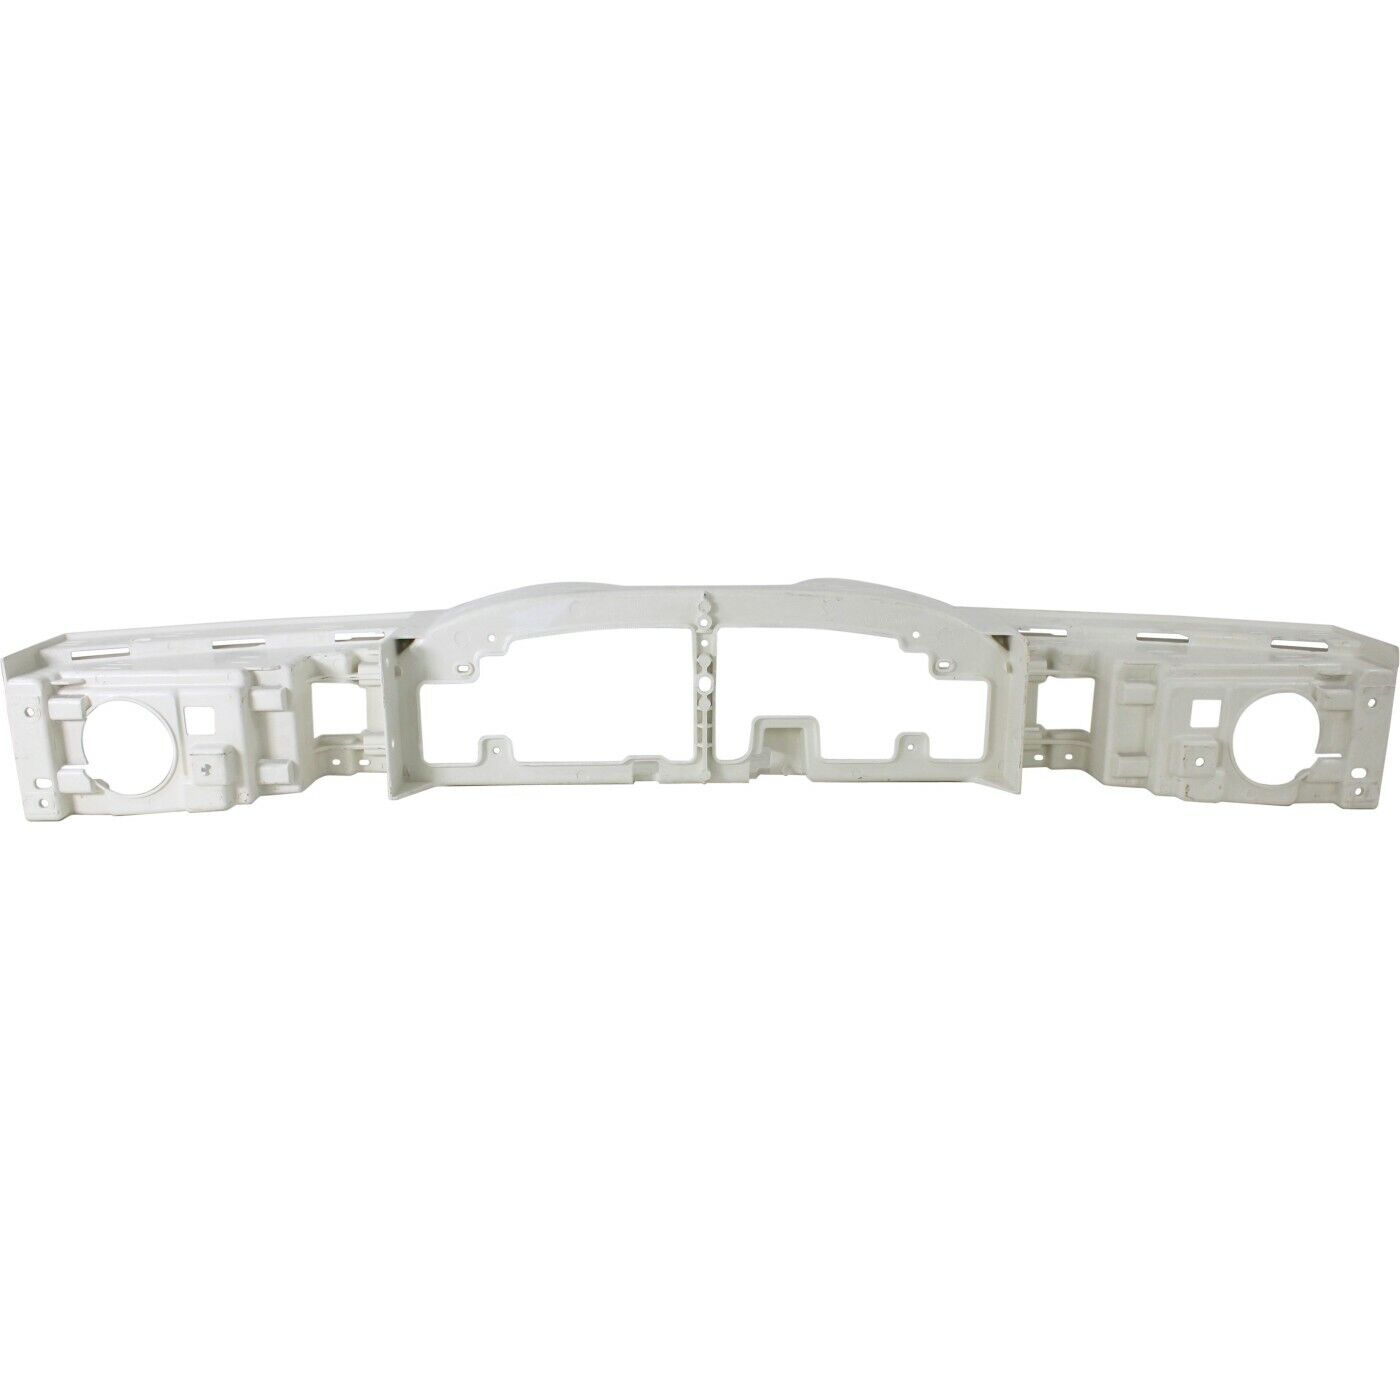 New Header Panel for 1998-2002 Lincoln Town Car